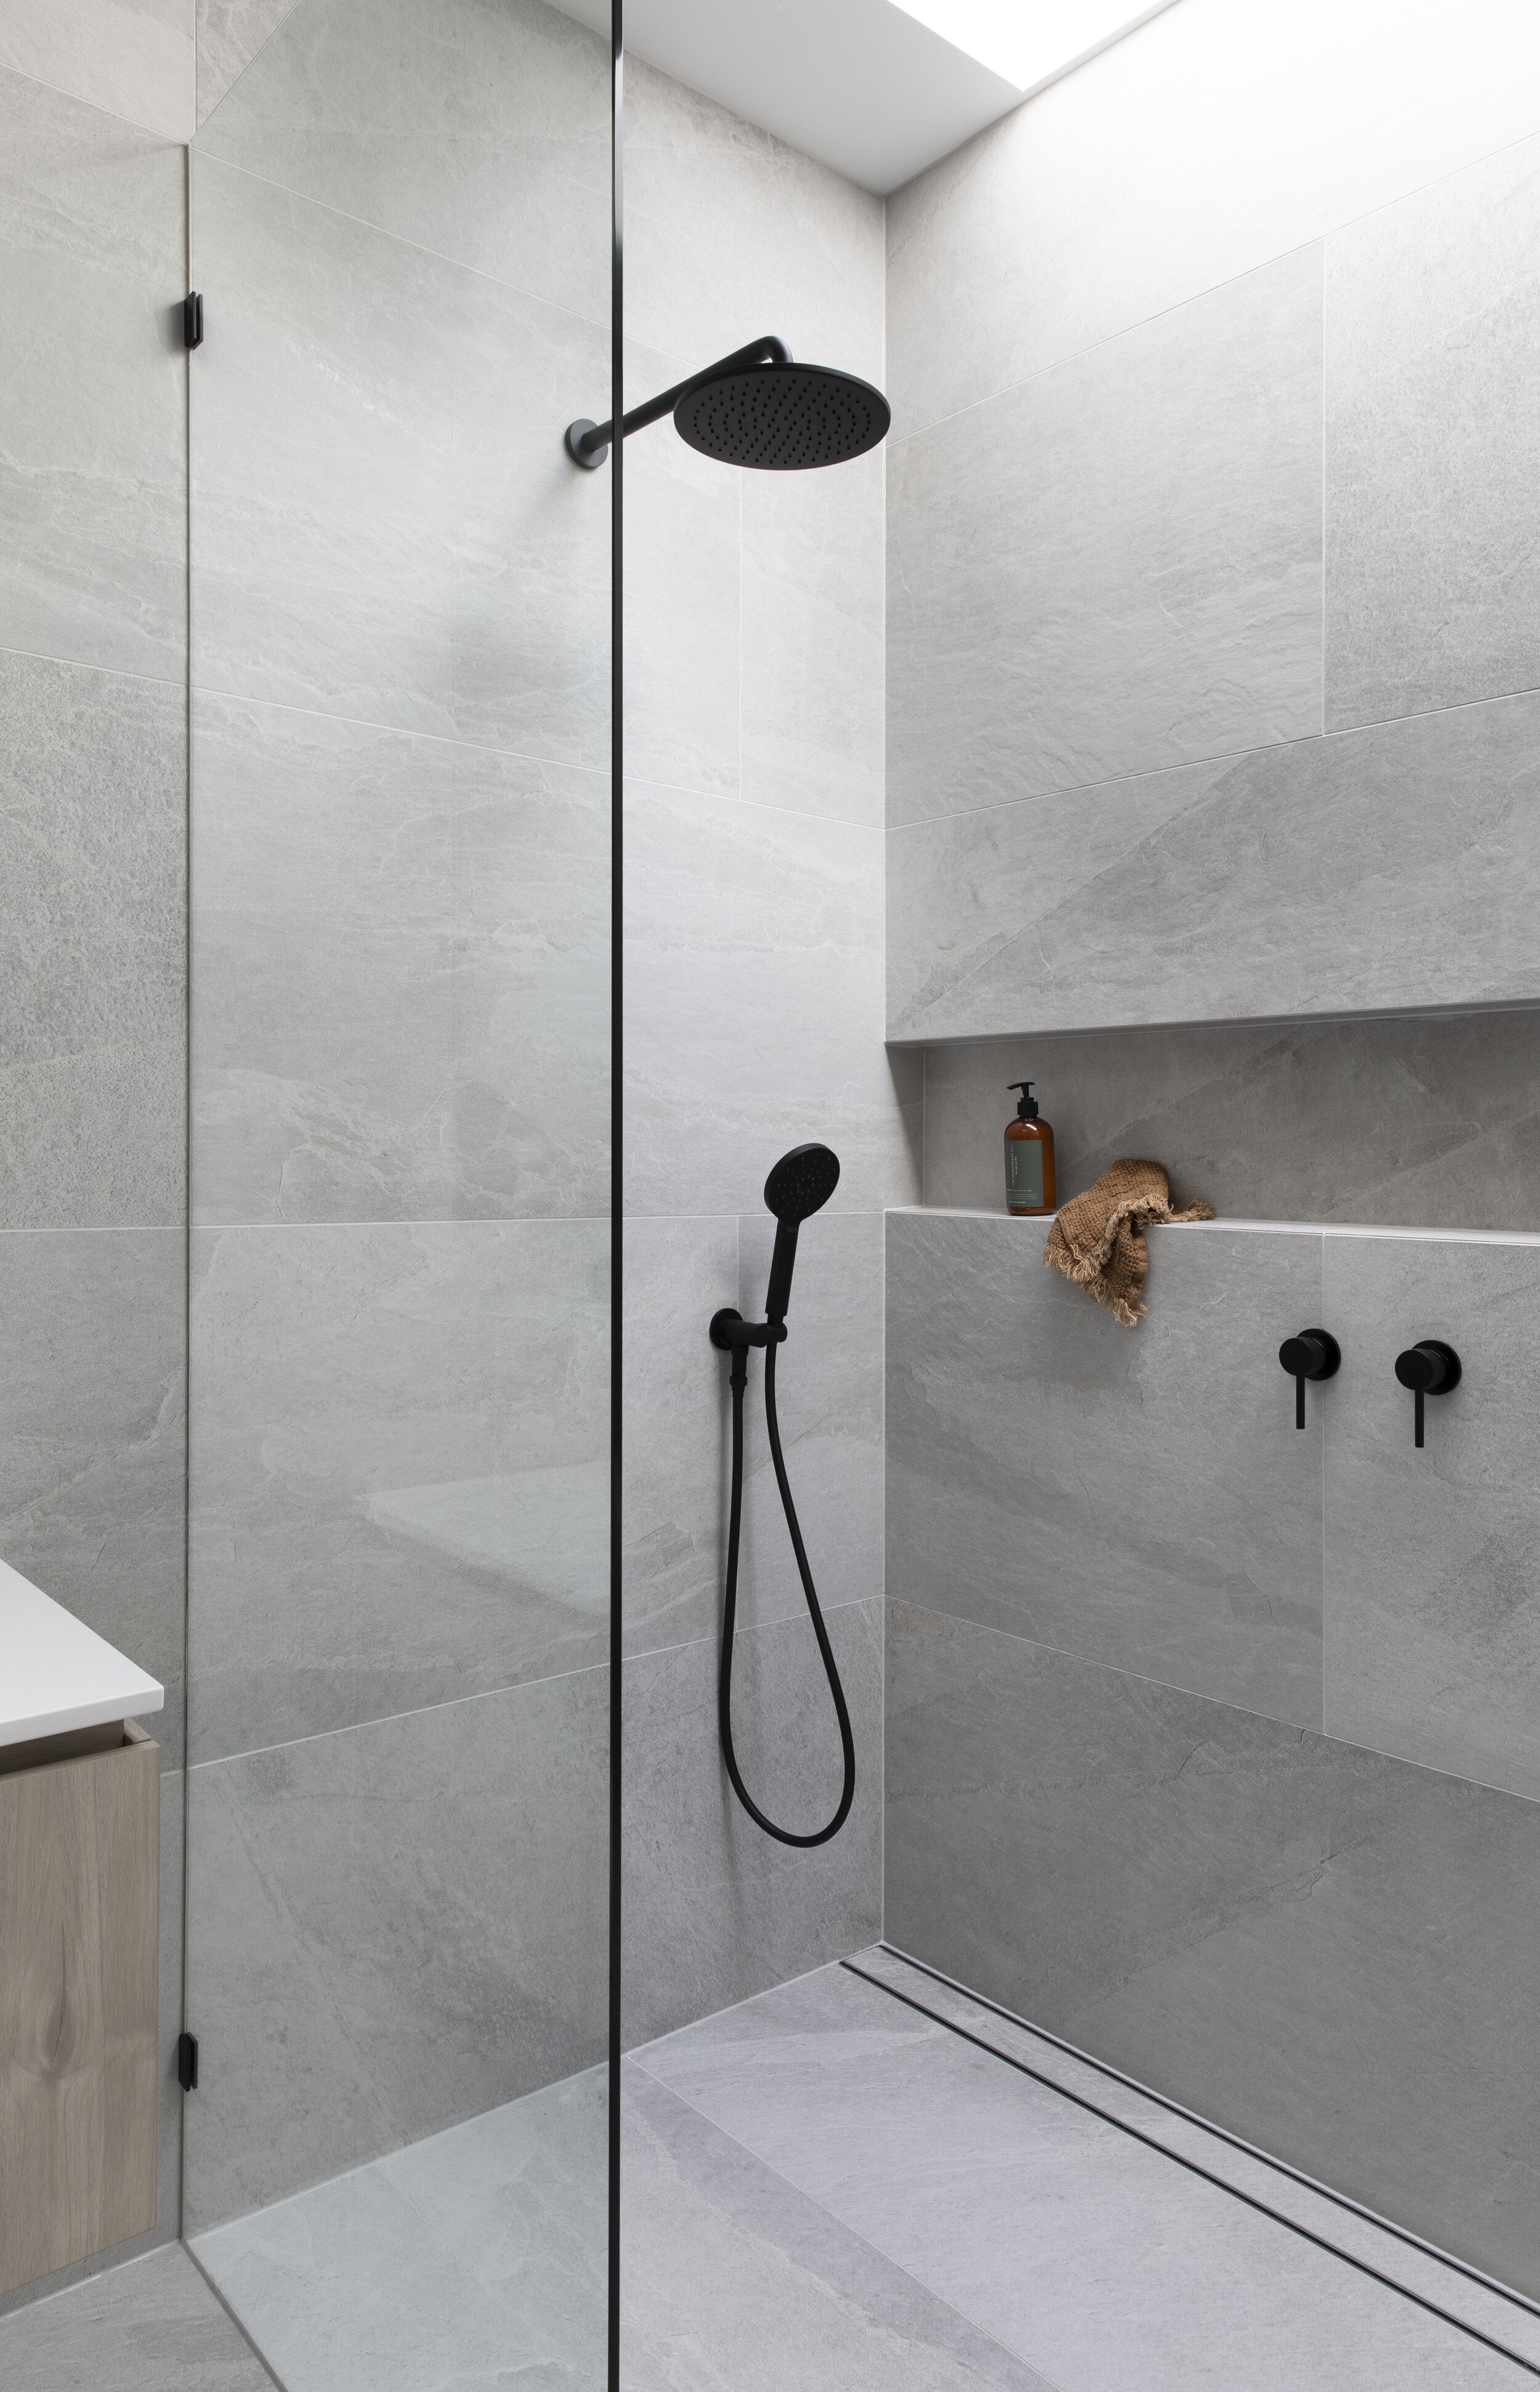 Can I Use Large Tiles In A Shower, Tiled Showers Pics